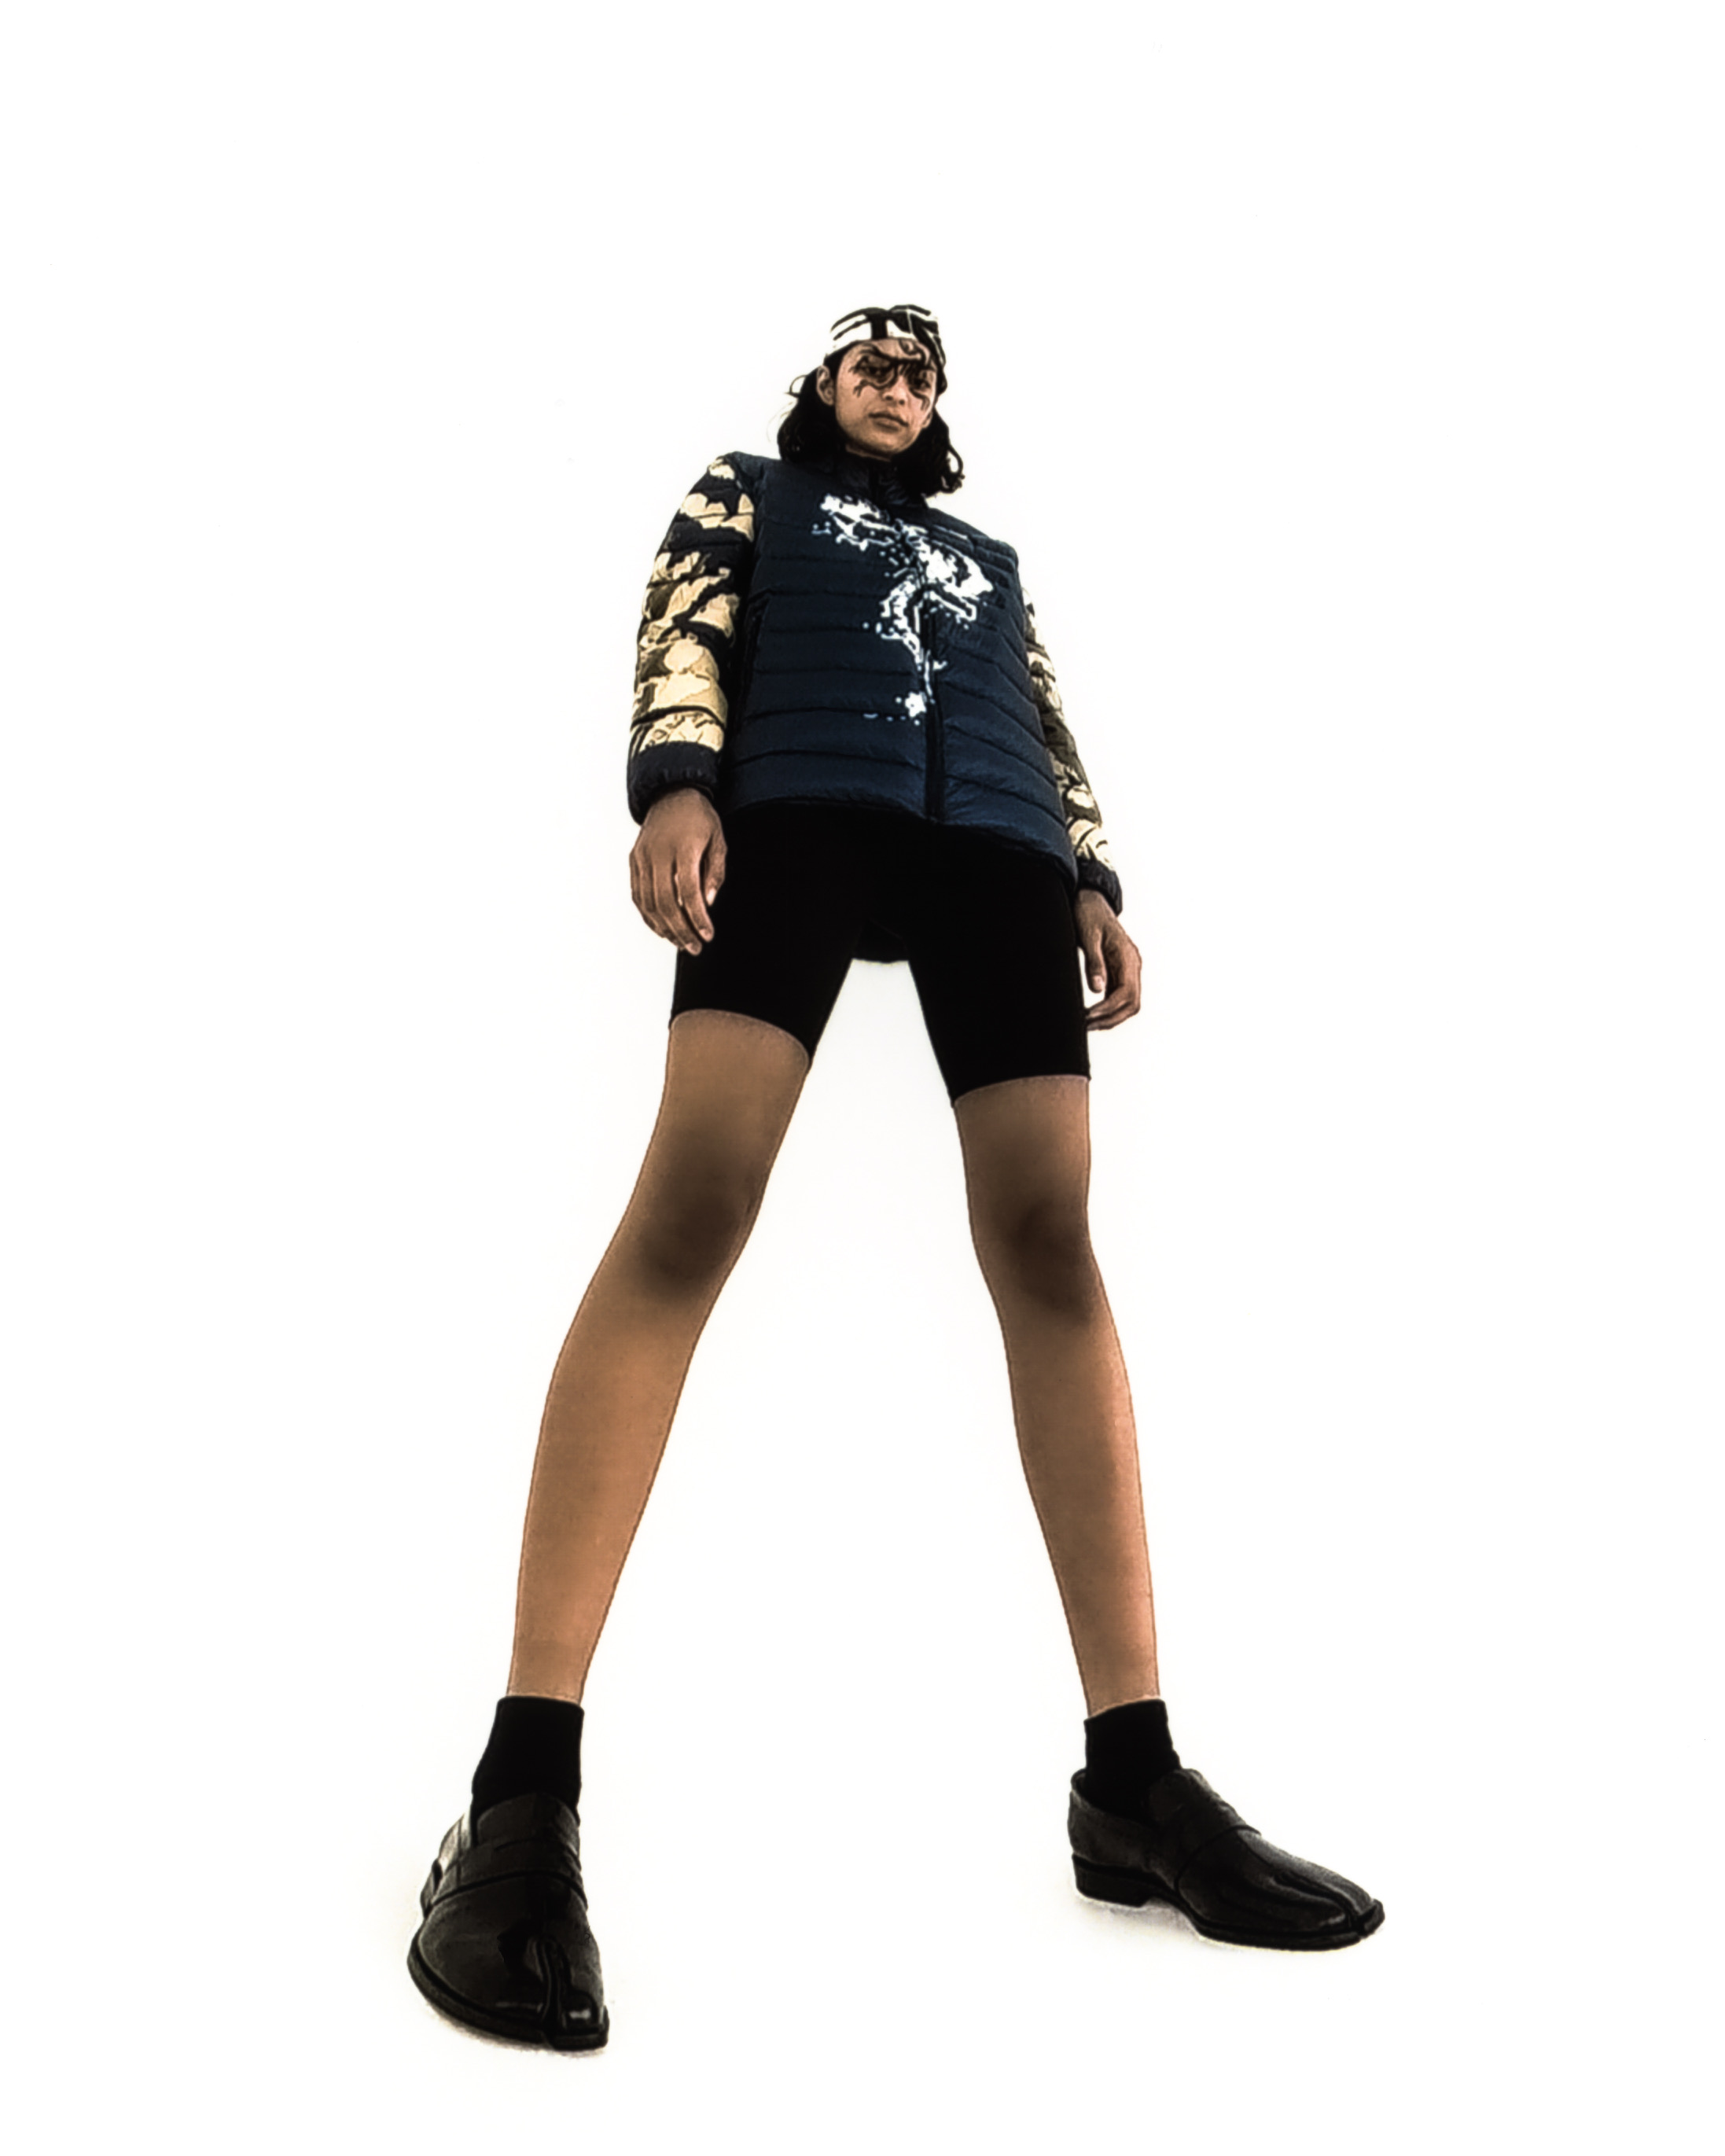 Full body shot of a model wearing glack graphic liner, a puffer vest and bandana against a white background